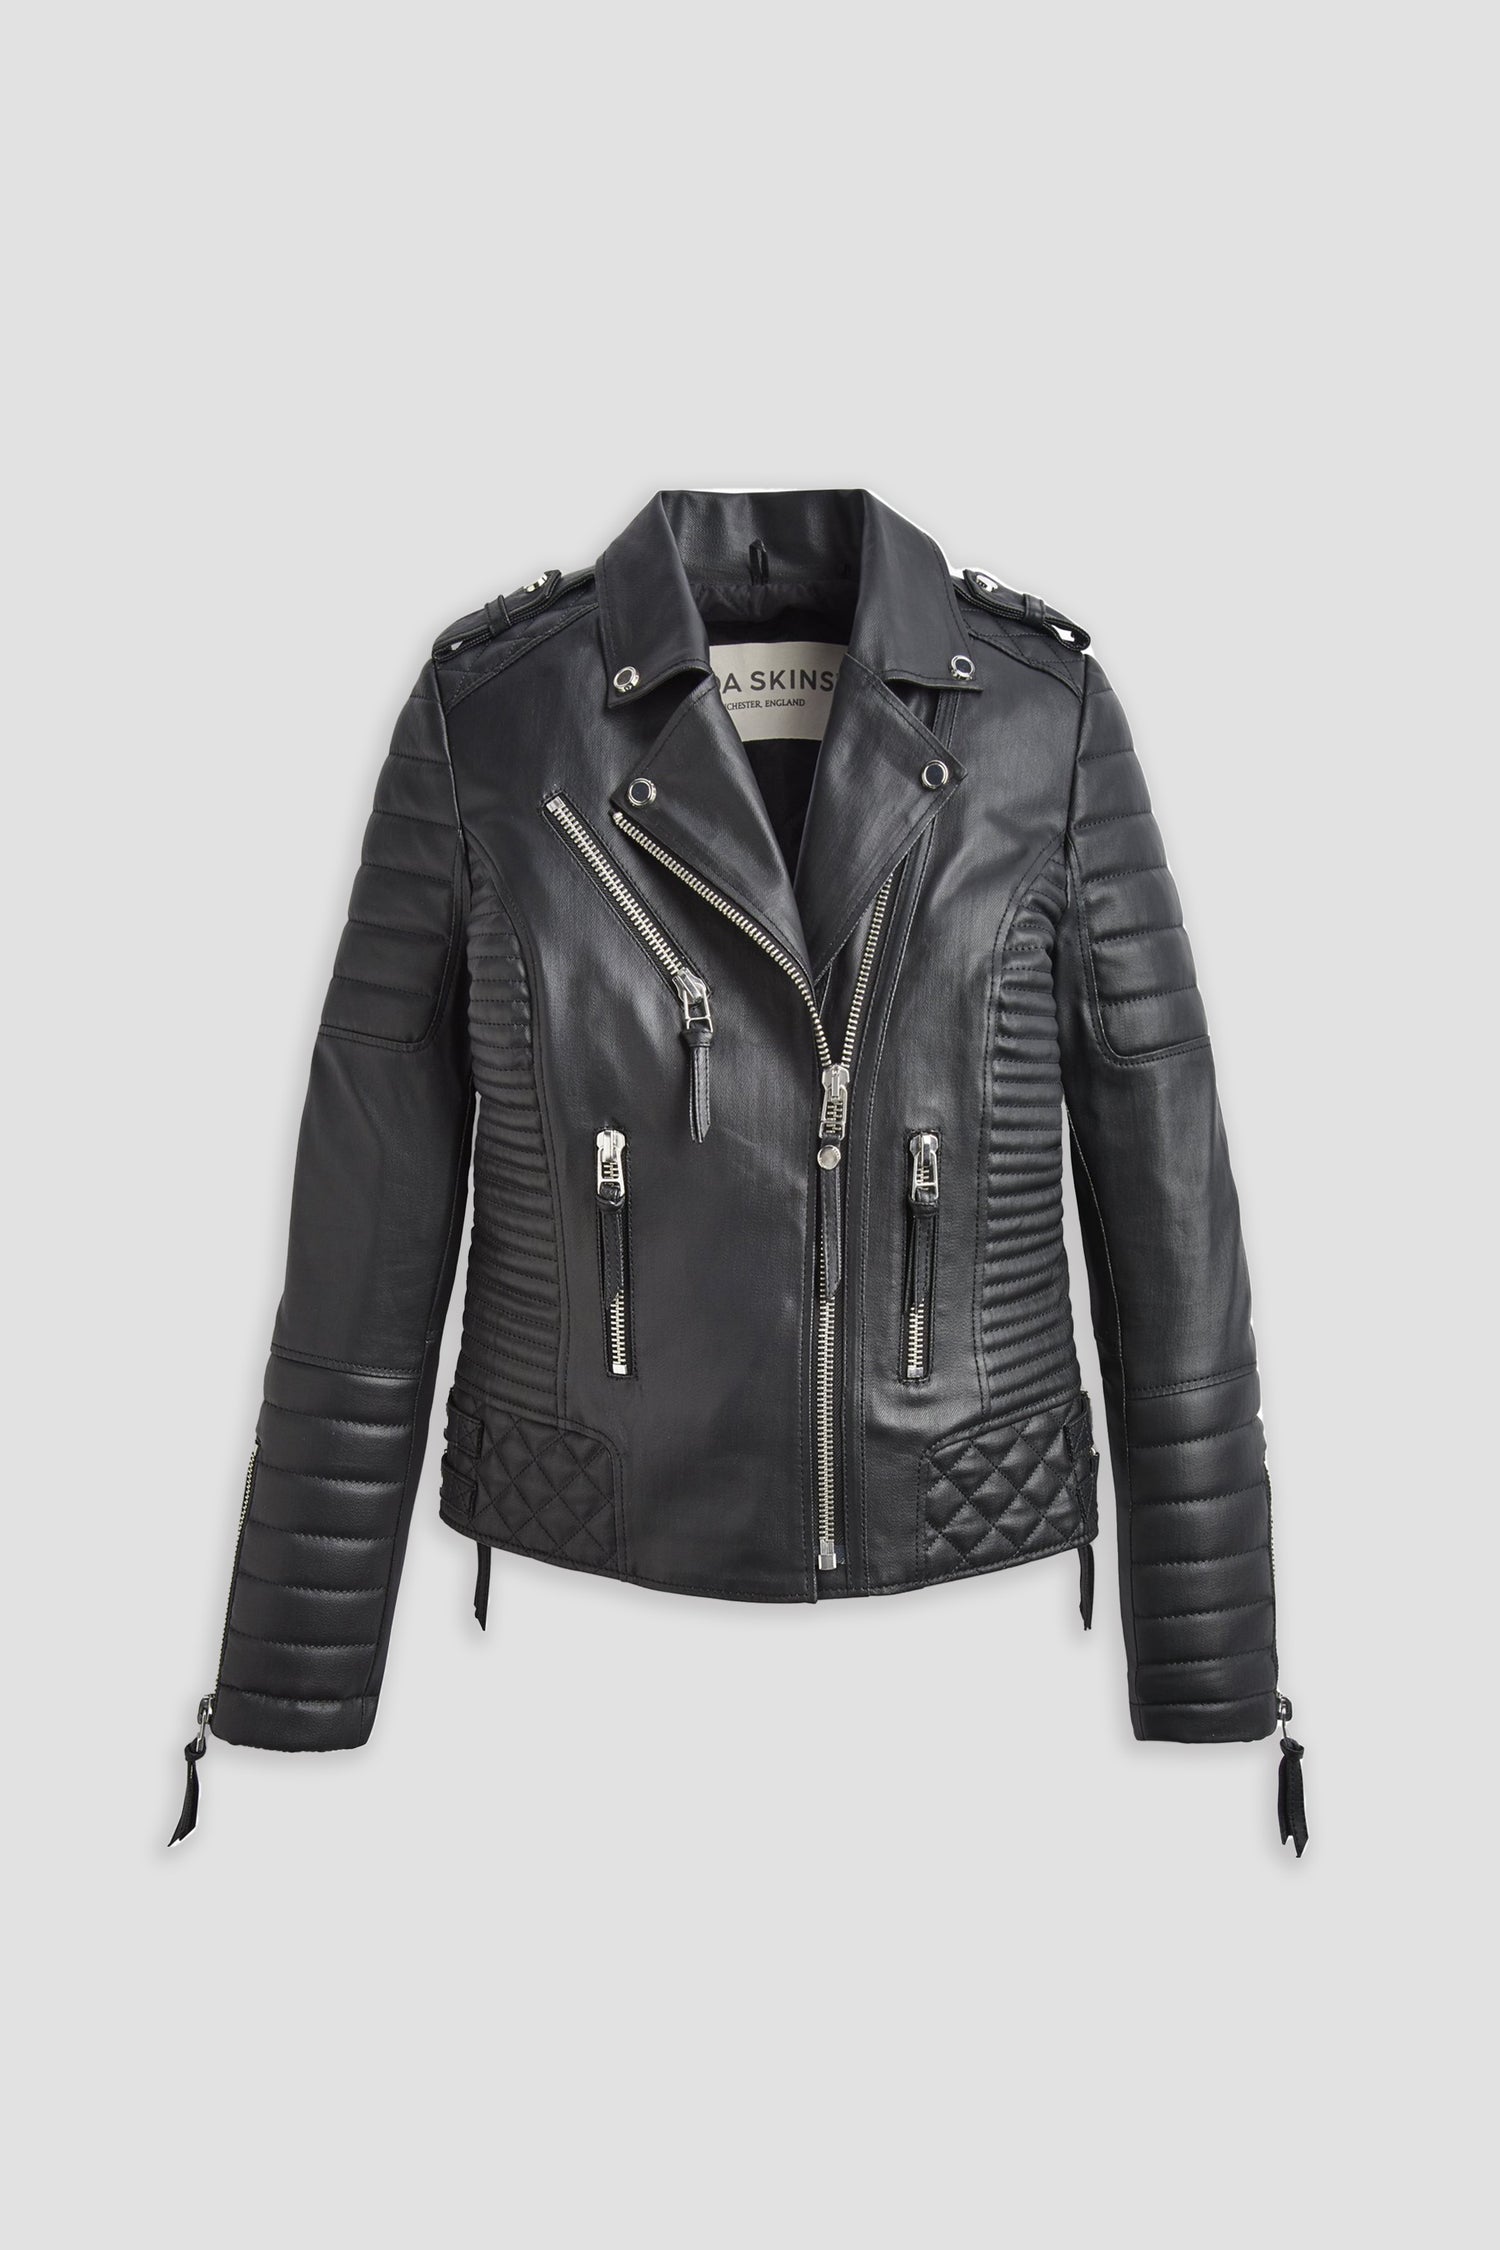 MAN JACKETS - By Price: Lowest to Highest